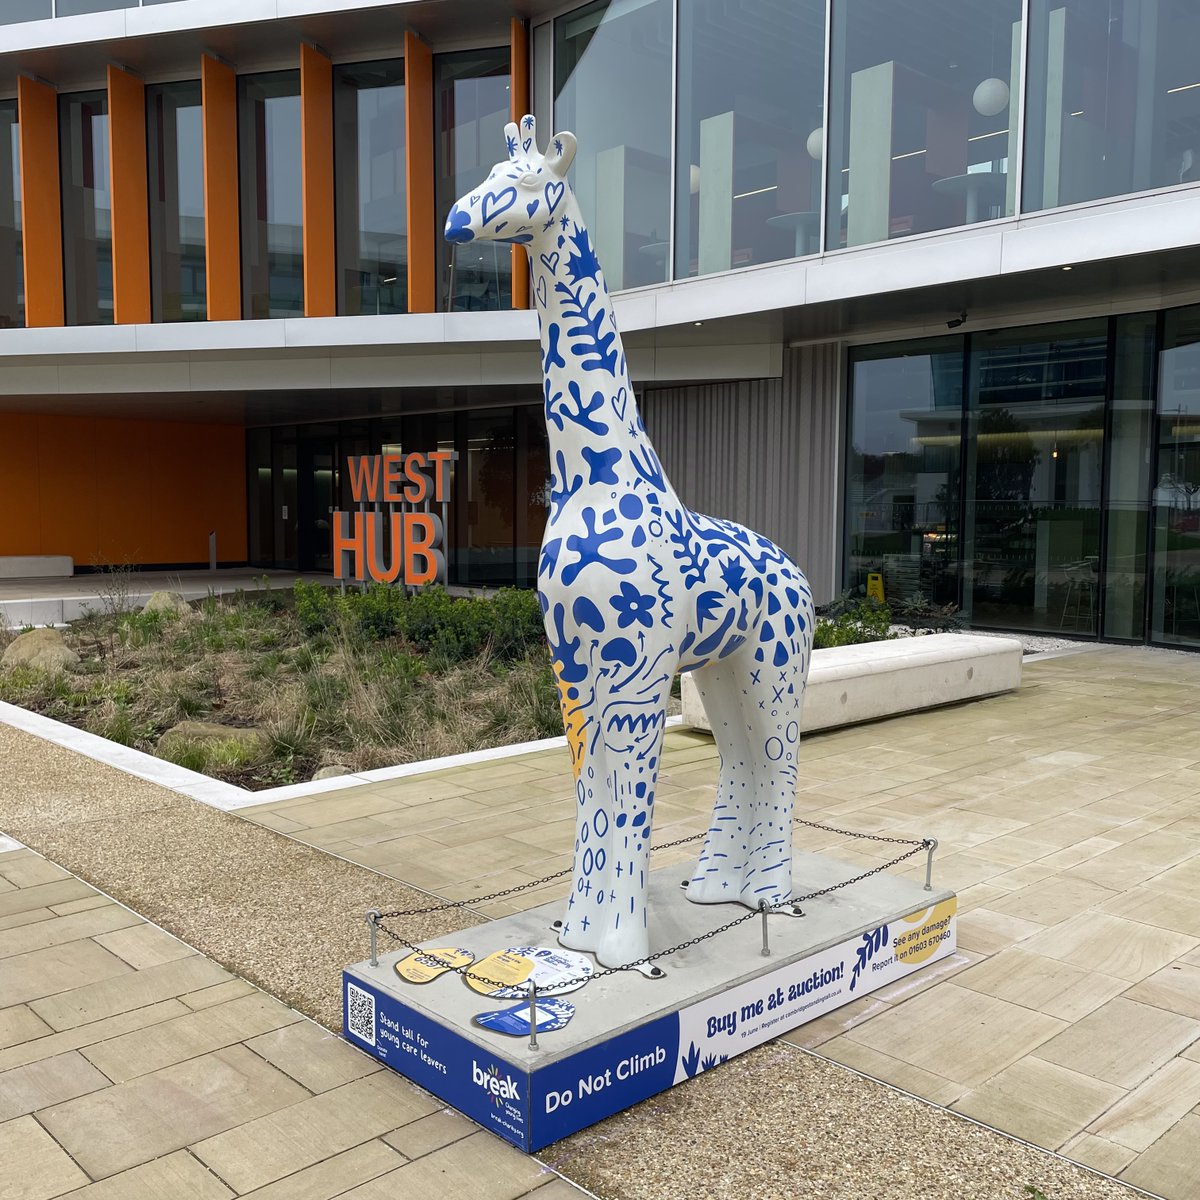 🦒 Meet Hubert of West Hub, First of His Name, Leader of the Tower of Standing Tall! 🌿 The name Hubert means 'bright mind/ heart/ spirit' and pays tribute to the spirit of innovation and bright minds at the Cambridge West Innovation District, with West Hub at the heart of it.